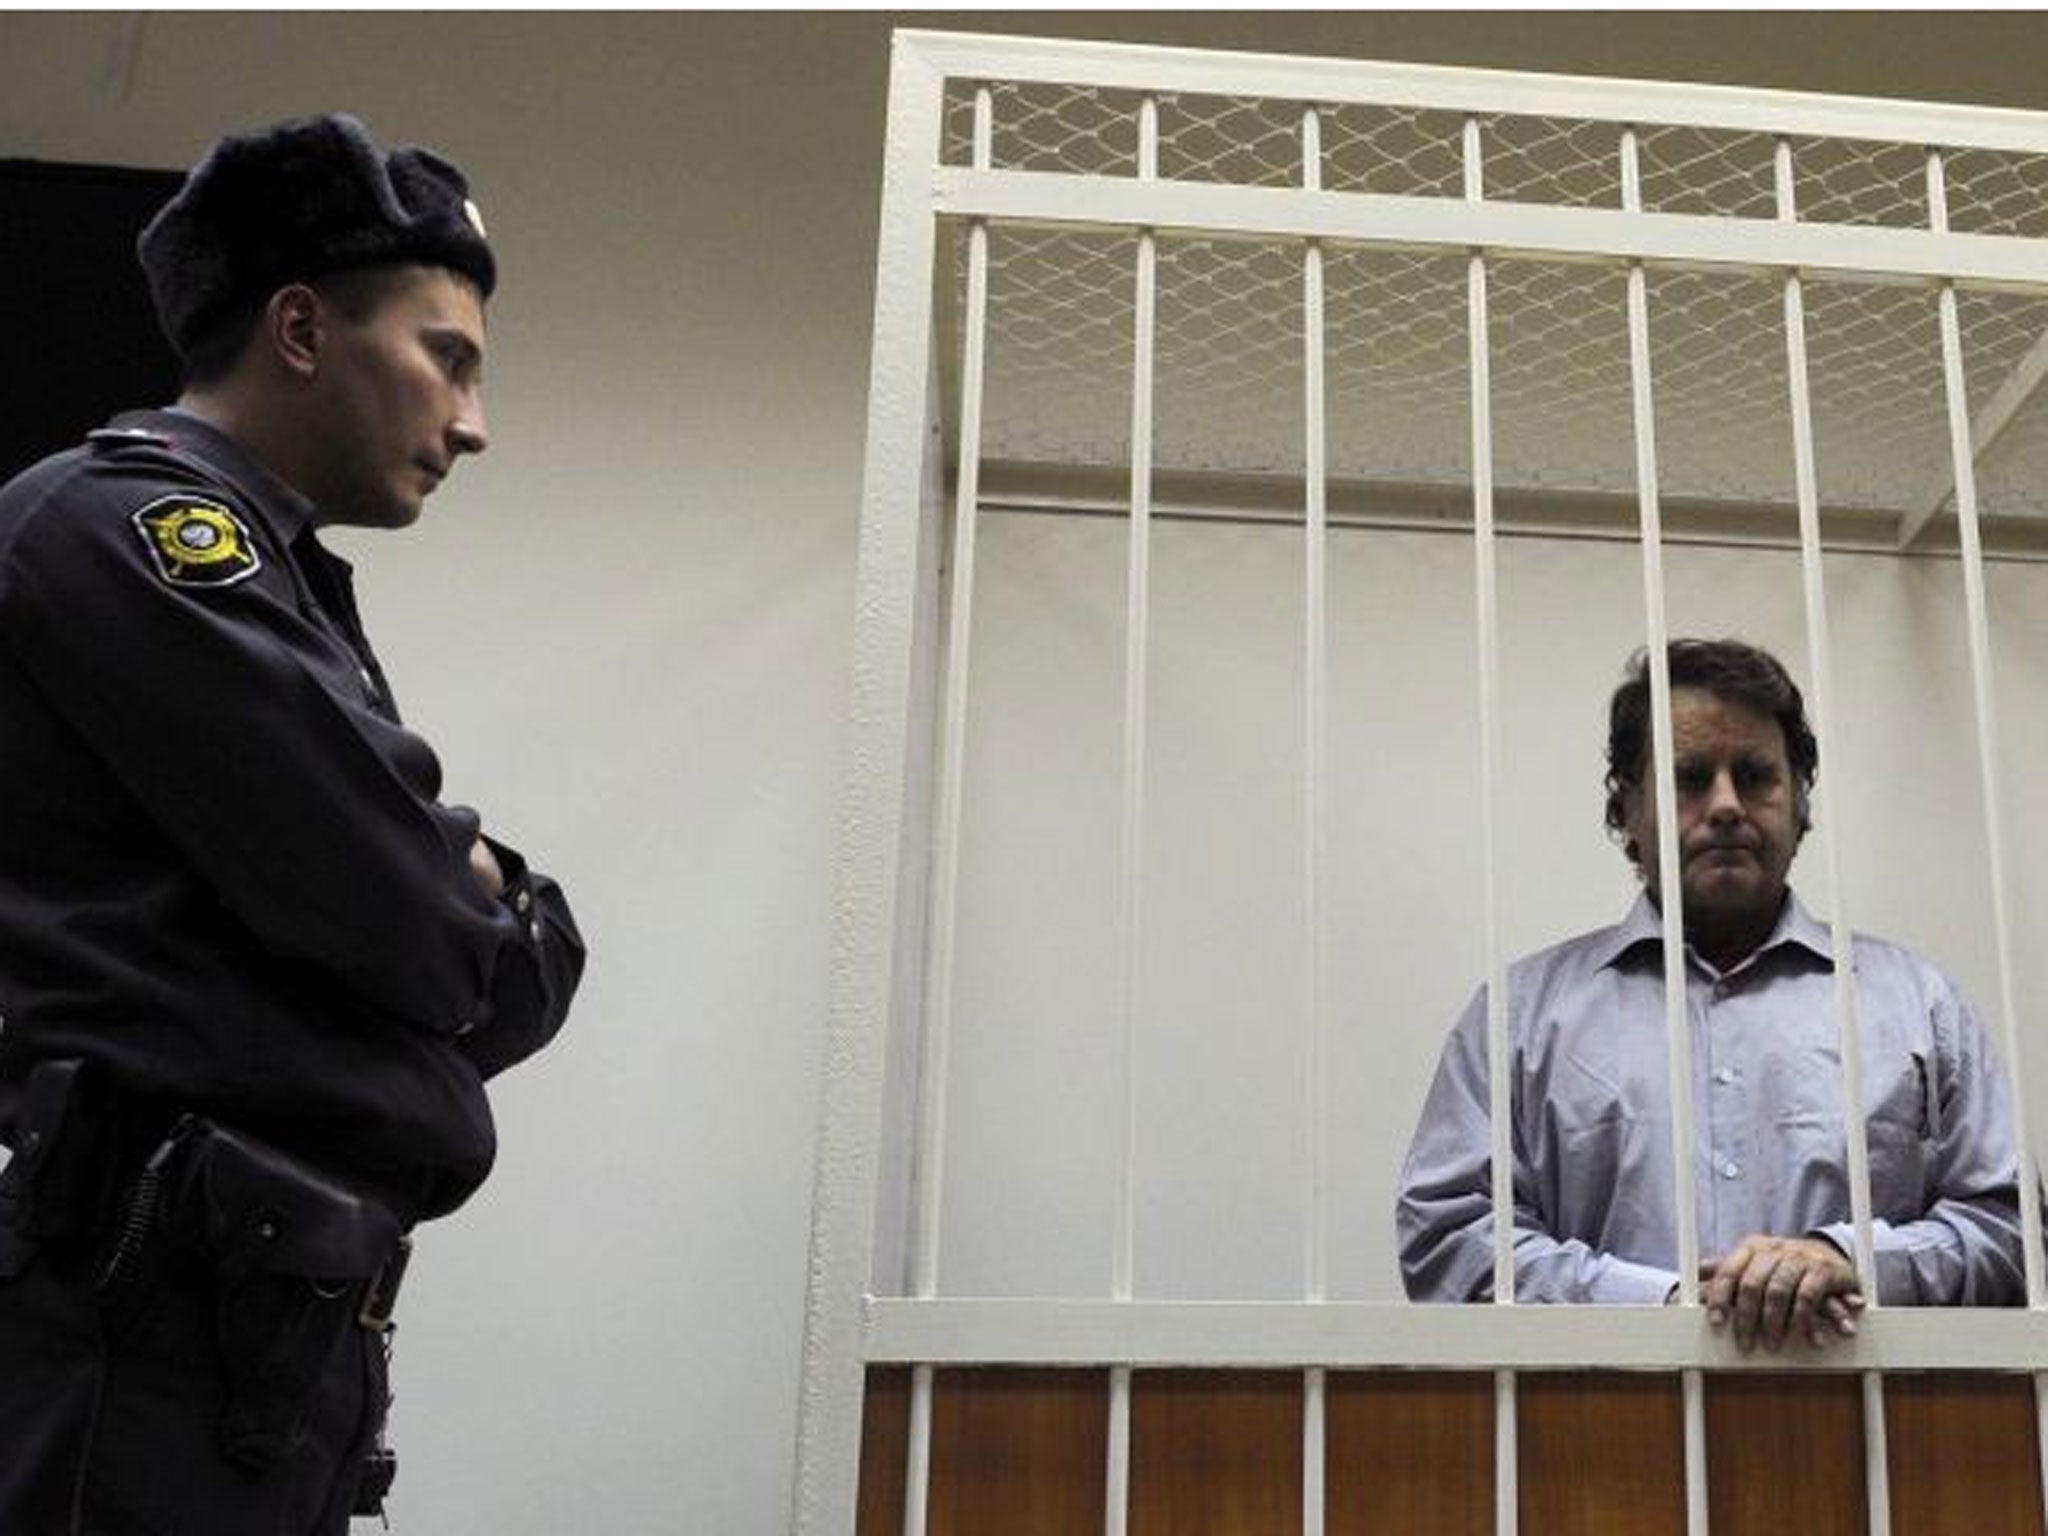 The captain of the Arctic Sunrise Dutch-flagged Greenpeace protest ship, Peter Willcox from USA, stands in a defendant cage in a court in Russia's second city of Saint Petersburg, on November 20, 2013.